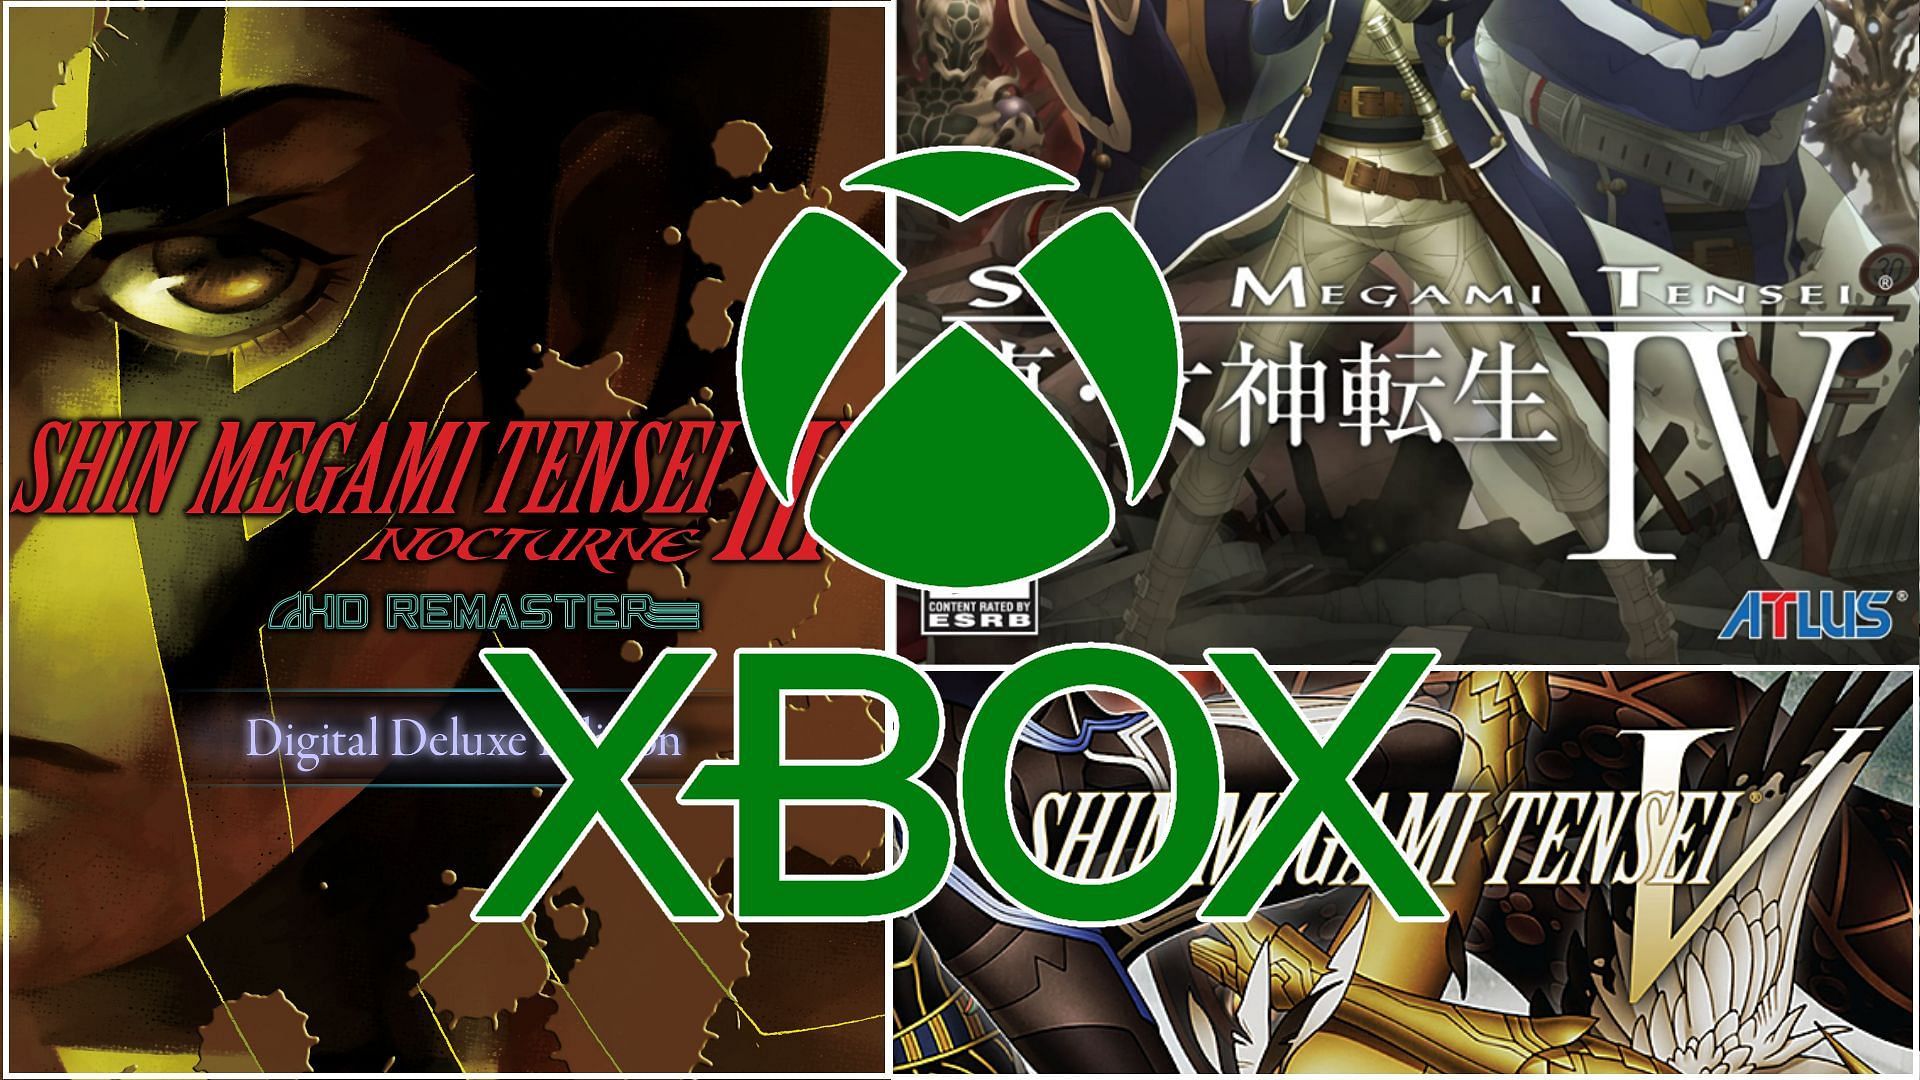 The box arts of Shin Megami Tensei 3, 4 and 5 with the XBox logo on top.